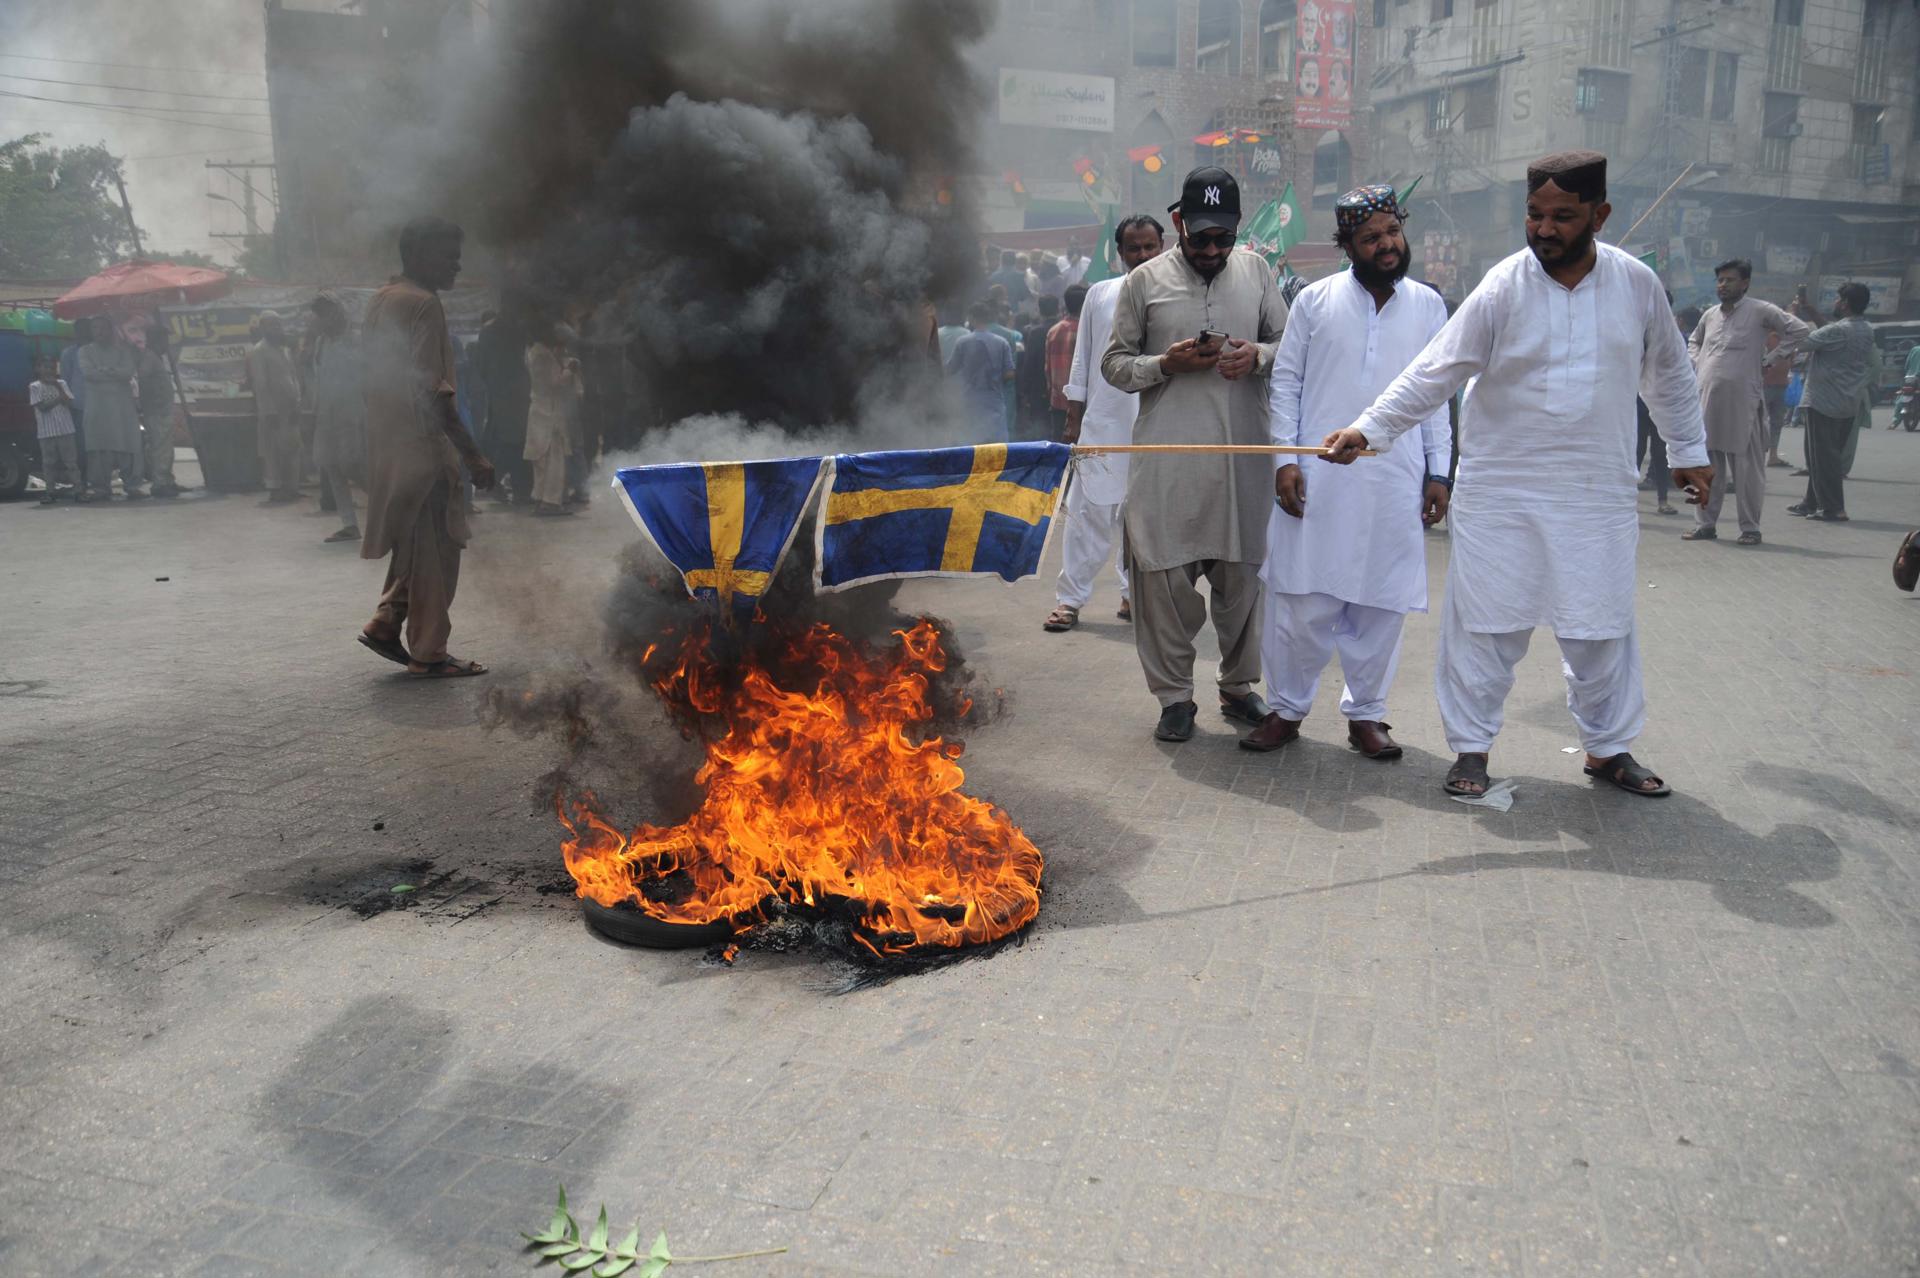 Protesters burn Swedish flags to protest the burning of a copy of the Quran in Sweden, in Hyderabad, Pakistan, 05 July 2023. EFE/EPA/FILE/NADEEM KHAWAR